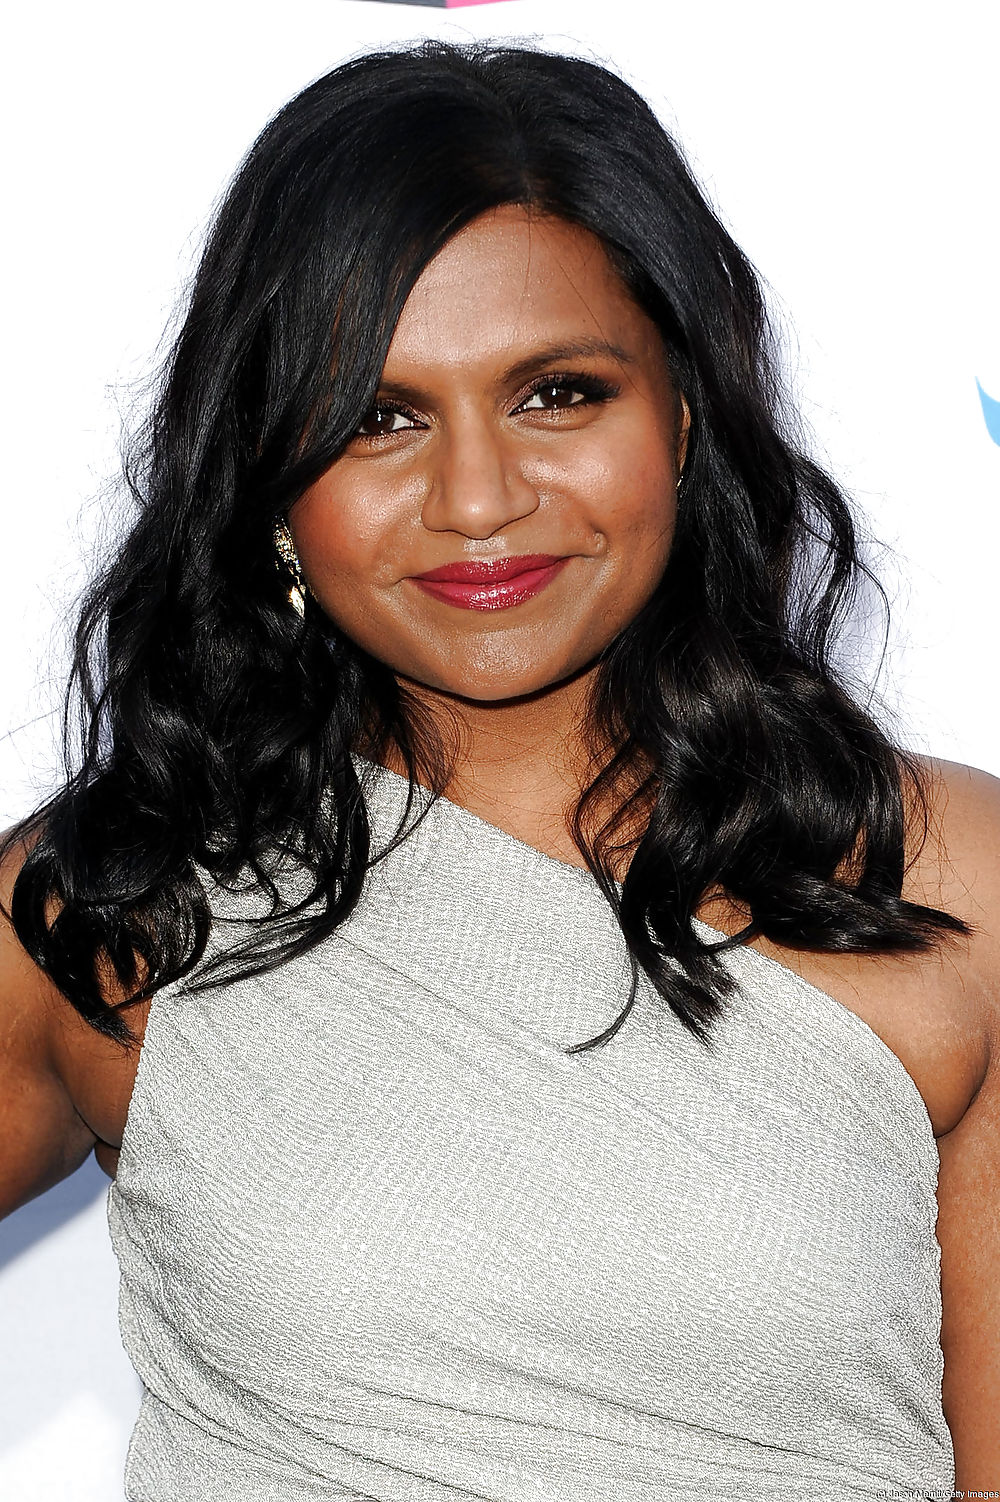 Hot Indian comedian Mindy Kaling - What would you do to her? #16250675